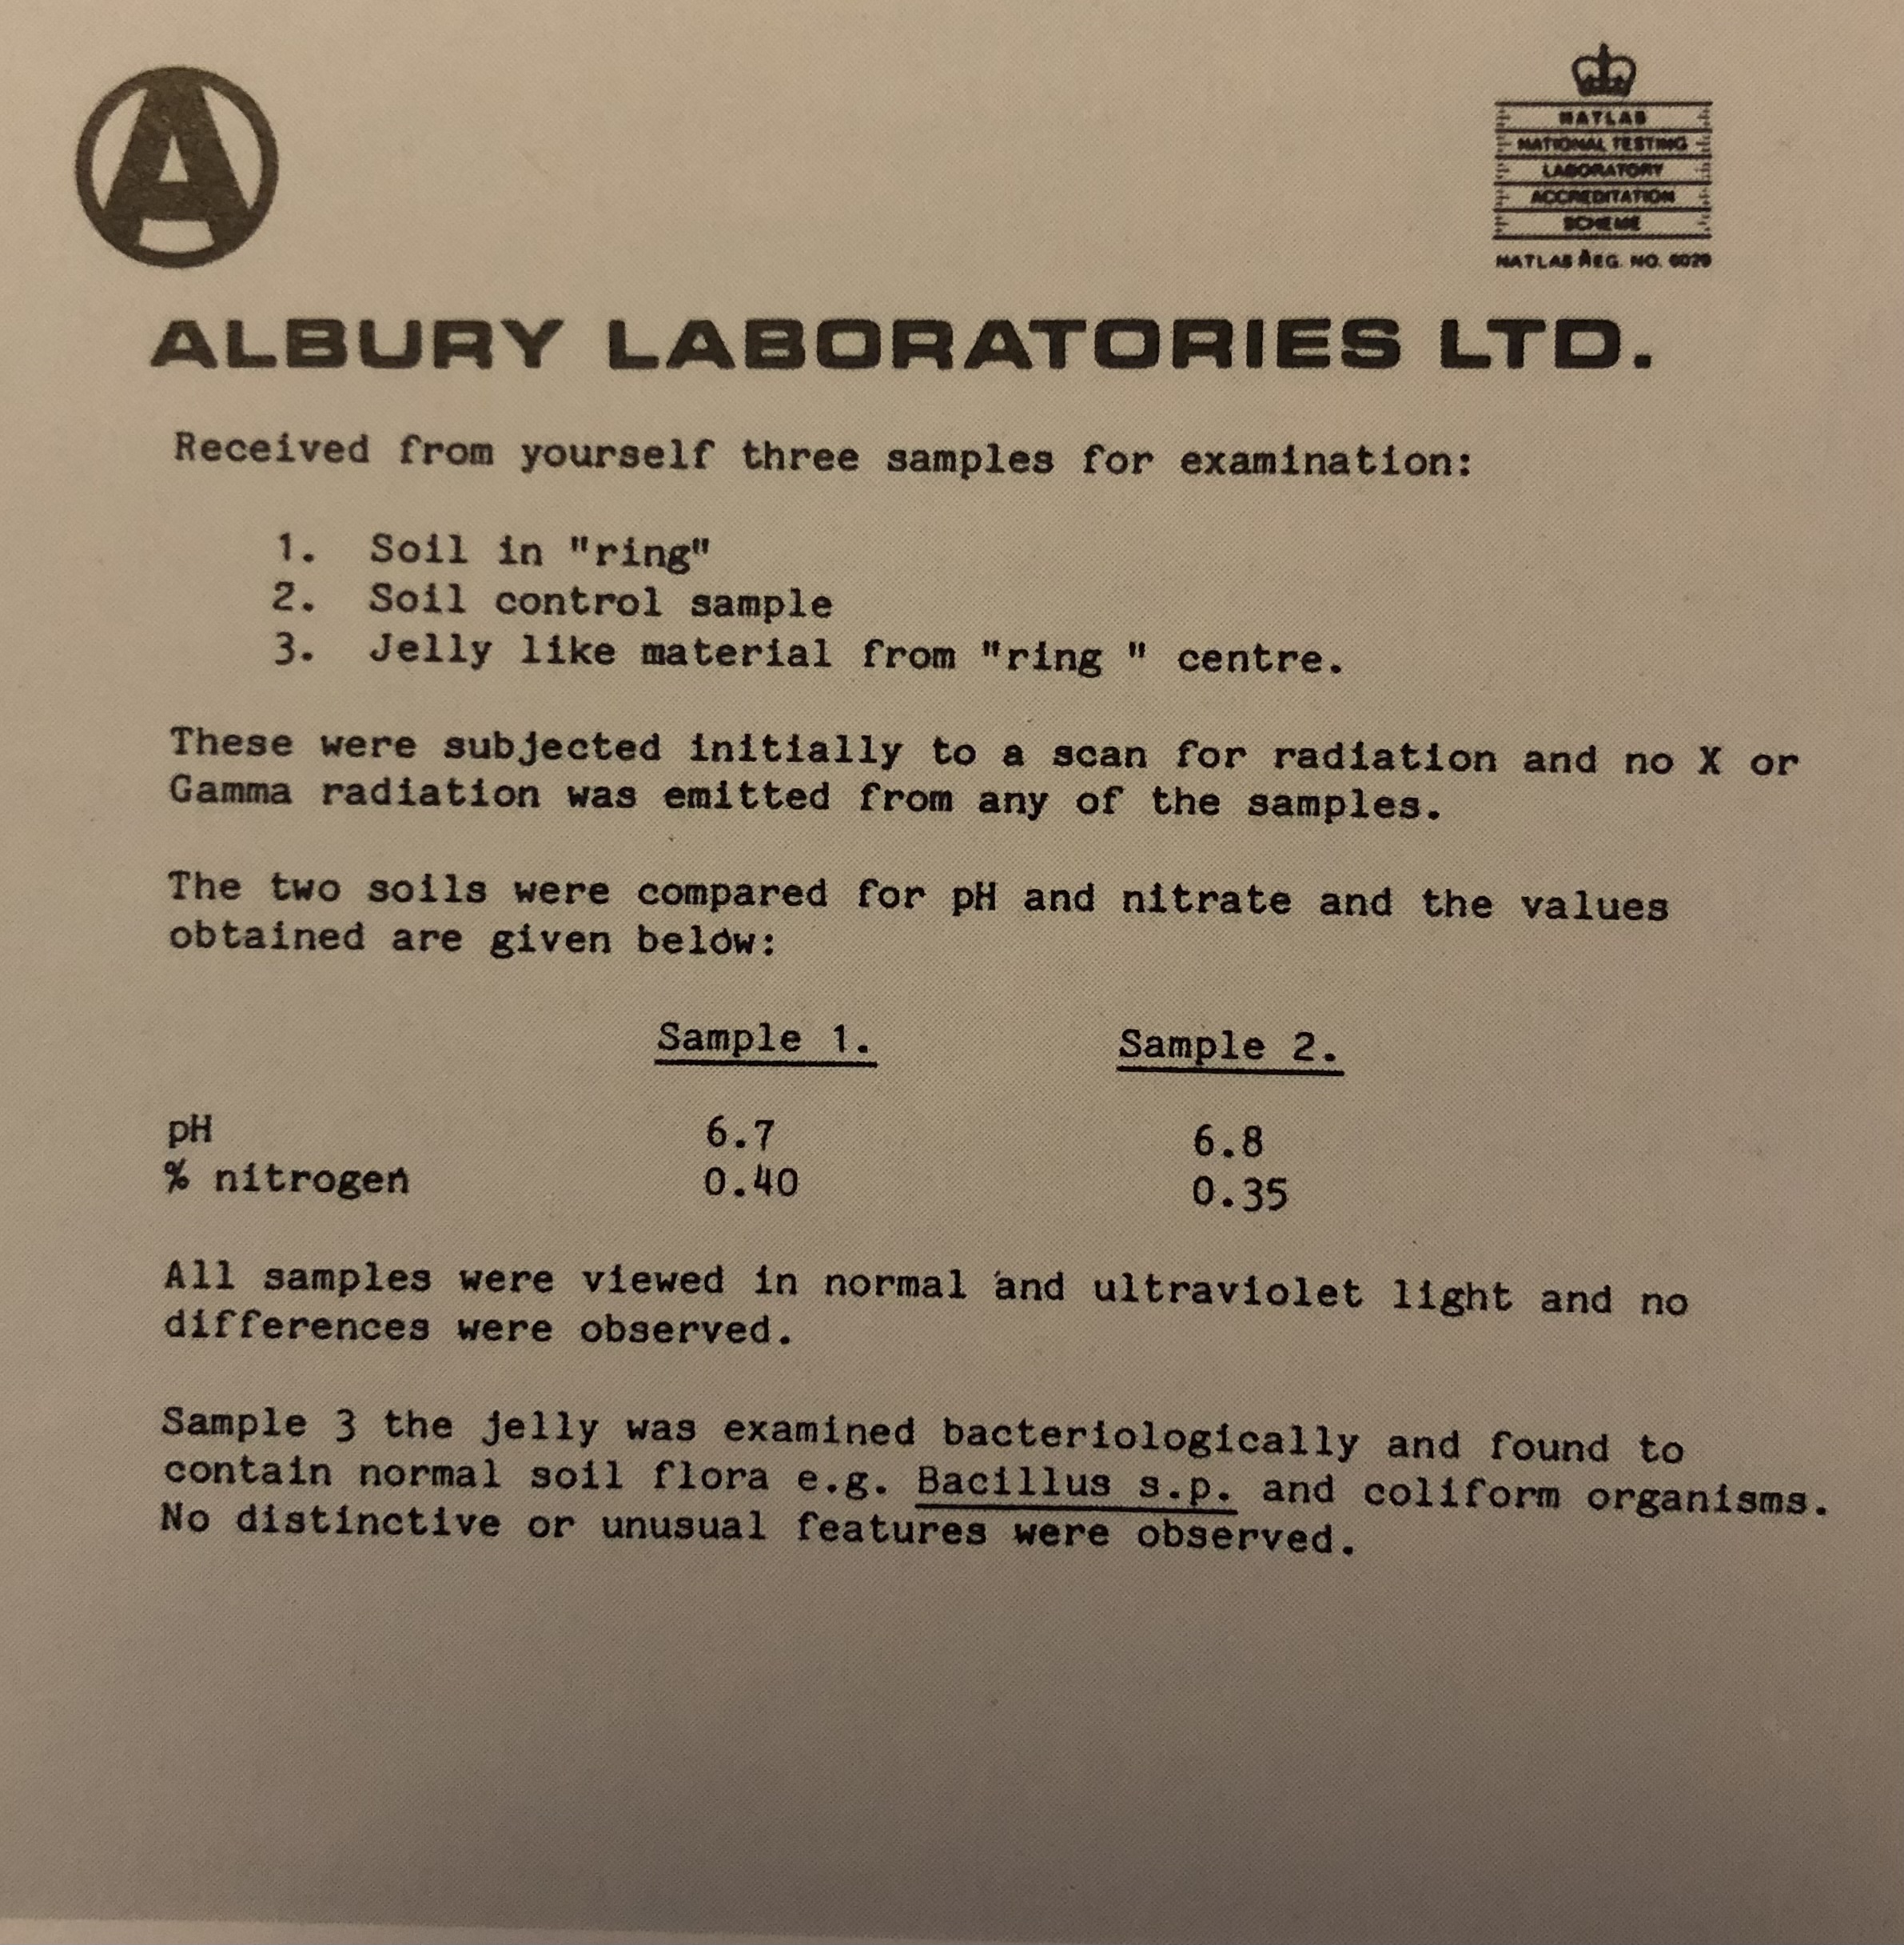 A photograph of a document with a bold A in a circle as the top left logo that reads, ‘ALBURY LABORATORIES LTD. Received from yourself three samples for examination: 1. Soil in ‘ring’ 2. Soil control sample 3. Jelly like material from ‘ring’ centre. These were subjected initially to a scan for radiation and no X or Gamma radiation was emitted from any of the samples. The two soils were compared for pH and nitrate and the values obtained are given below: Sample 1 pH 6.7, % nitrogen 0.40; Sample 2 pH 6.8, % nitrogen 0.35. All samples were viewed in normal and ultraviolet light and no differences were observed. Sample 3 the jelly was examined bacteriologically and found to contain normal soil flora e.g. Bacillus s.p. and coliform organisms. No distinctive or unusual features were observed.’